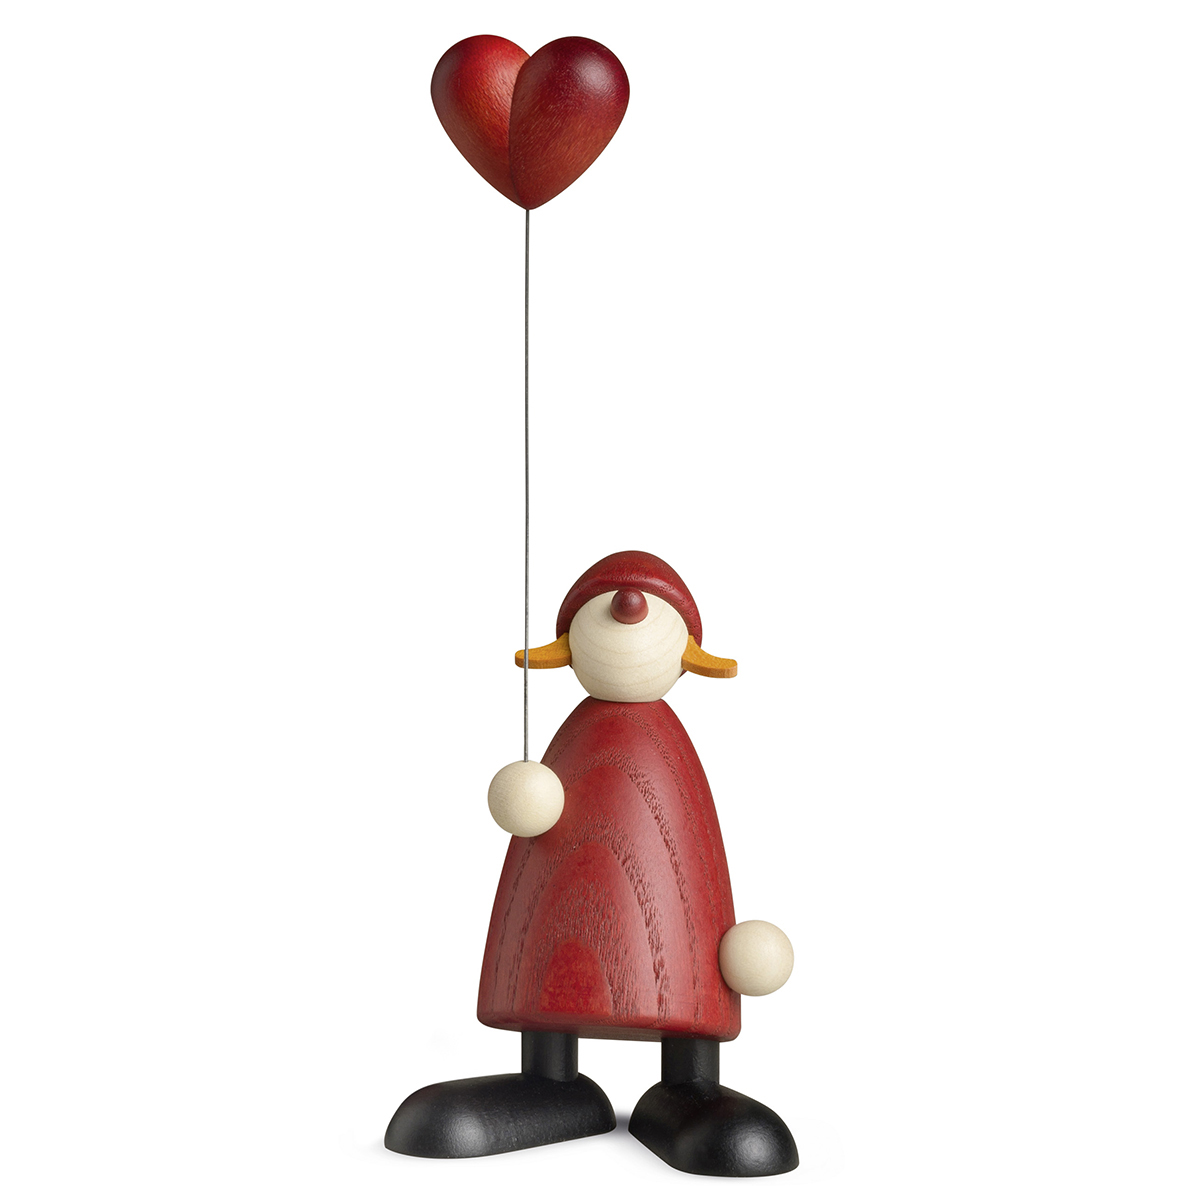 Mrs Claus holding a heart, small